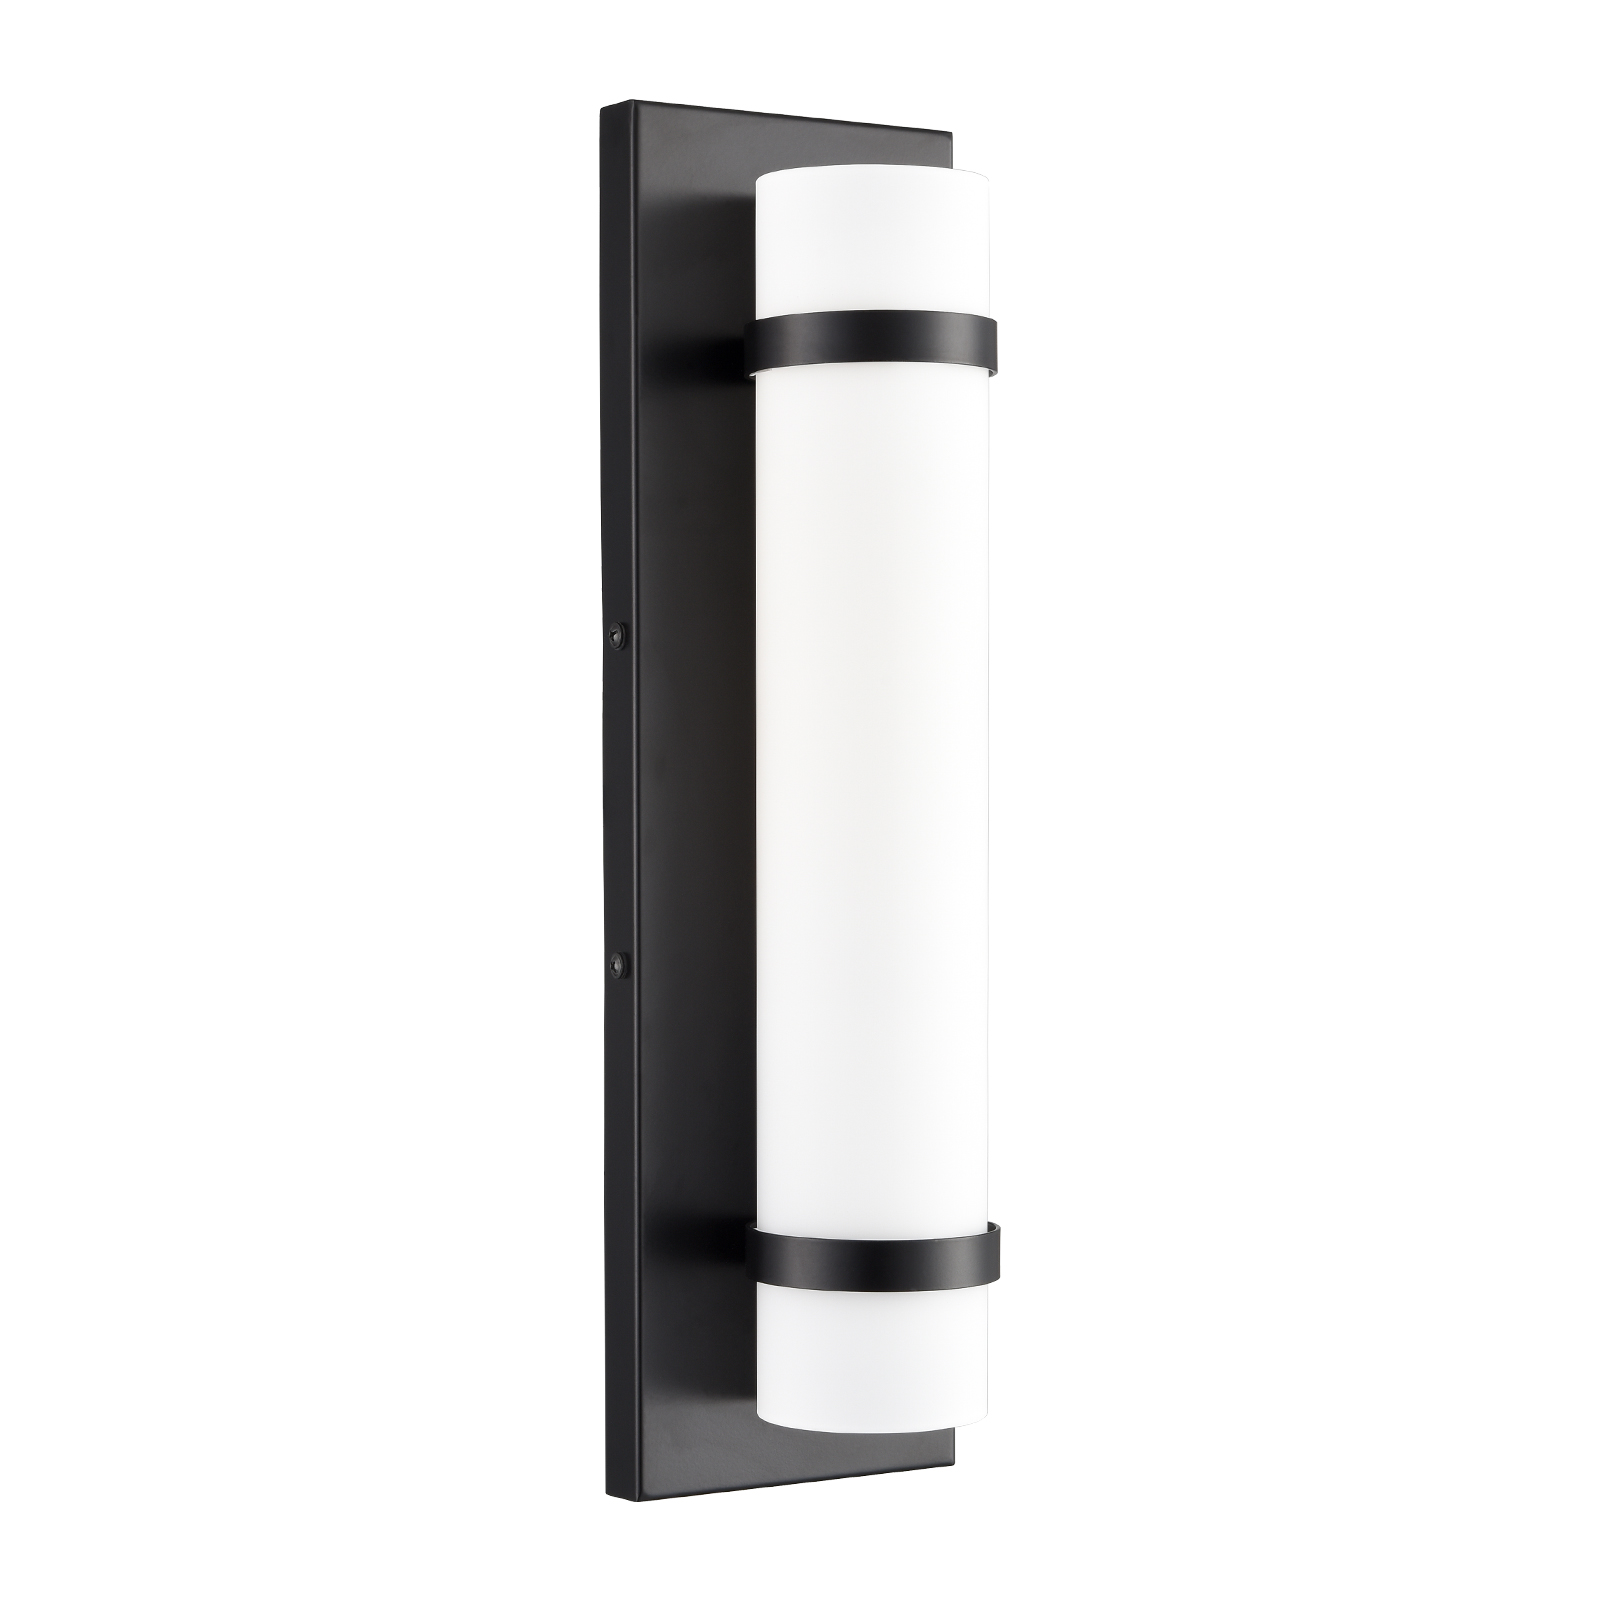 Black Bathroom Light Fixtures Modern Wall Sconce  for Bathroom Bedroom Hallway Stairway Frosted Glass